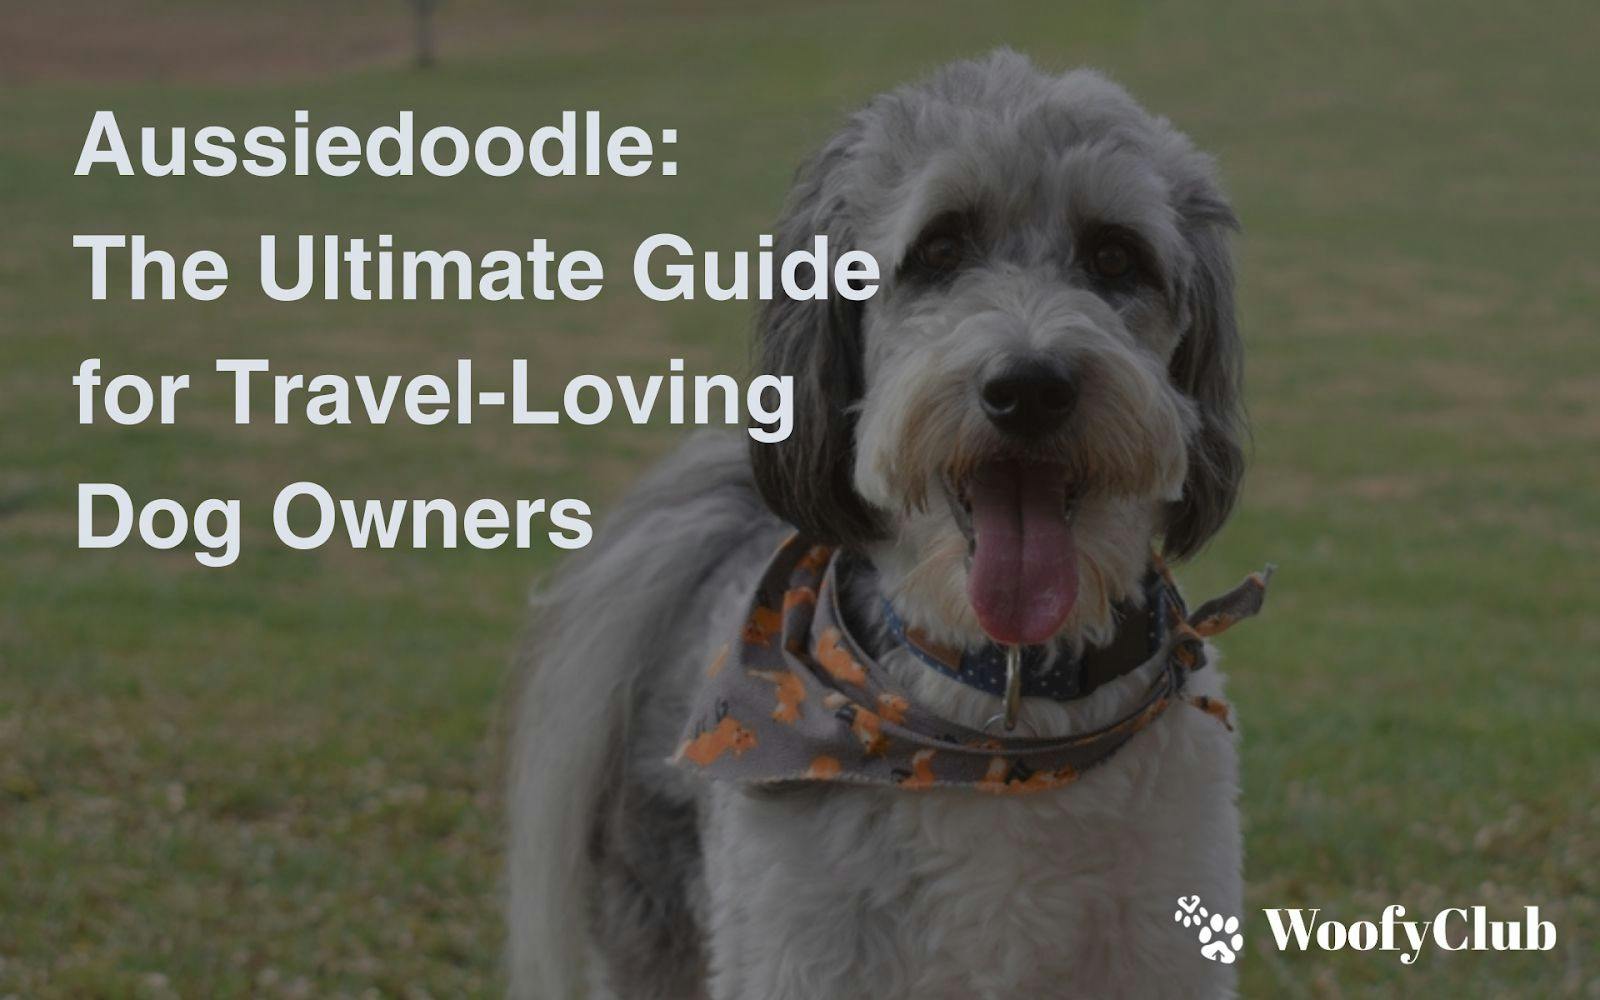 Aussiedoodle: The Ultimate Guide For Travel-Loving Dog Owners